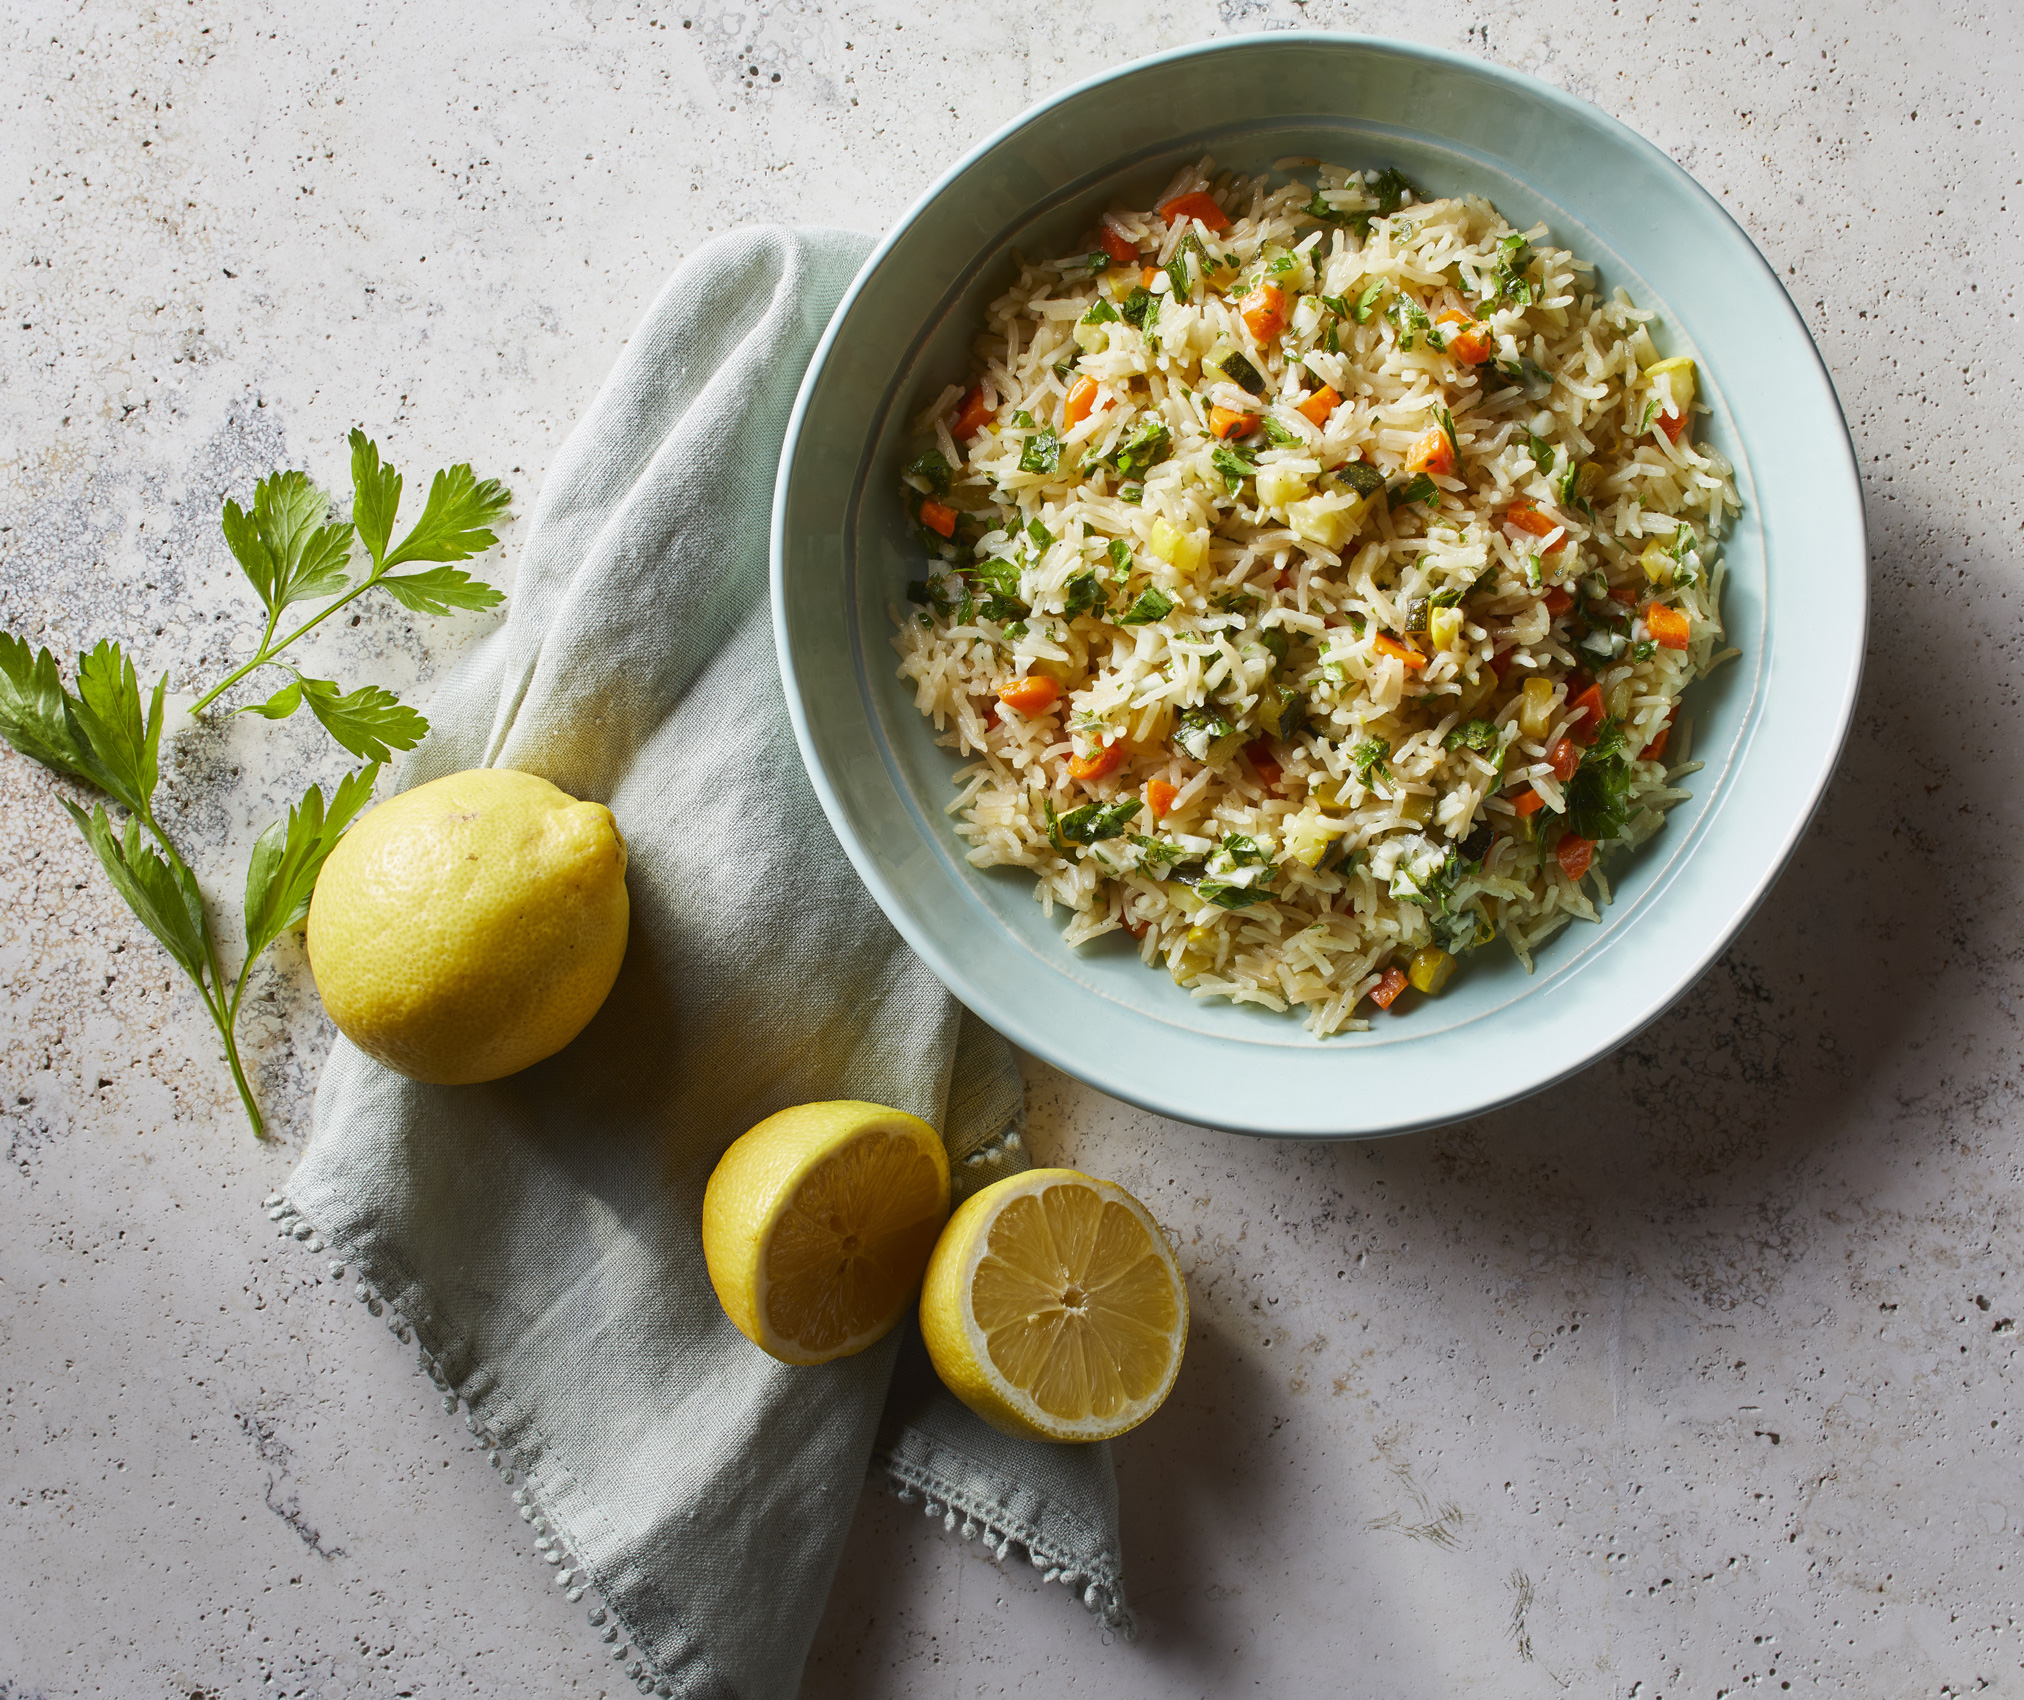 Gremolata Rice photo by Chris Kessler Photography.  Chris Kessler is a freelance Photographer based in Milwaukee Wisconsin. Specializing in Food photography and portraiture.